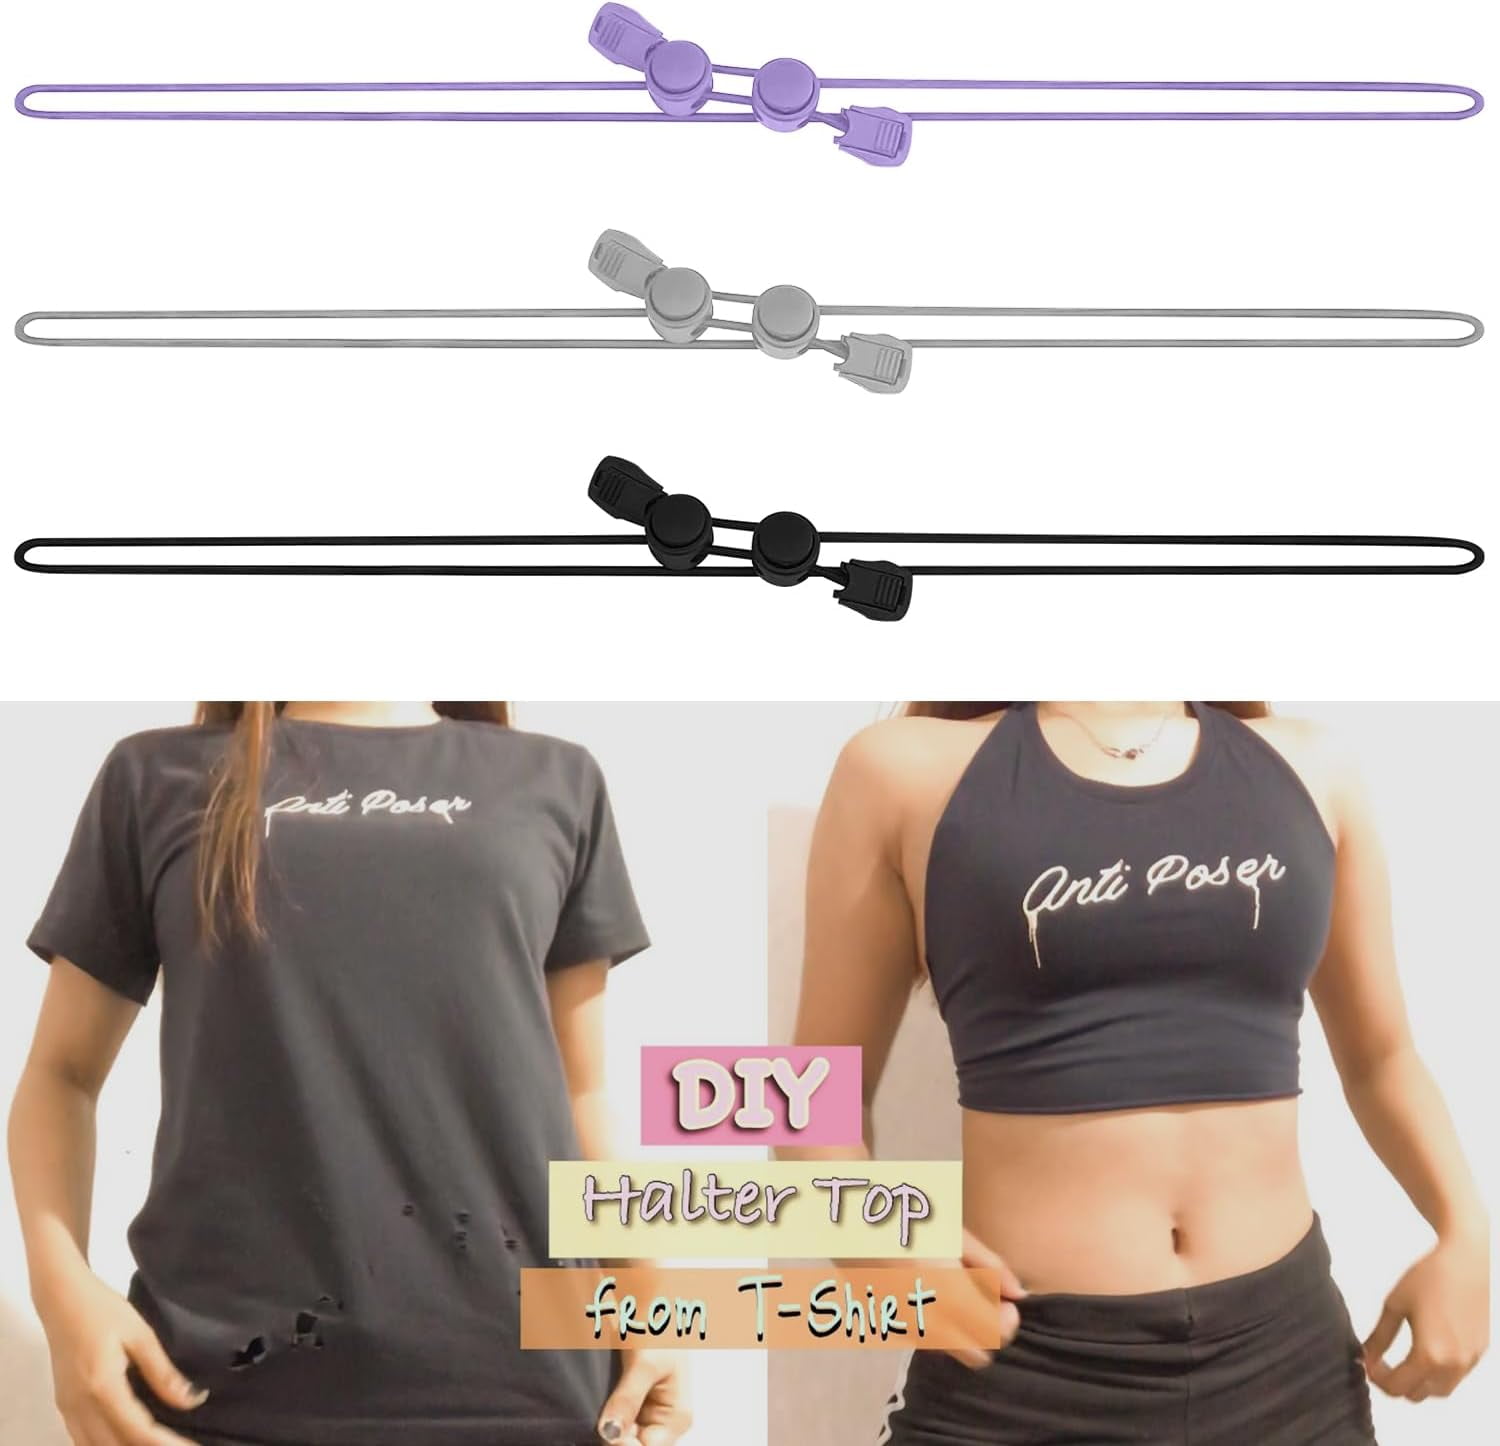 2 PCS Crop Tuck Band,Croptuck Adjustable Band,Crop Band for Tucking  Thirts,Invisible Shirt Stays Belt for Men/Women 